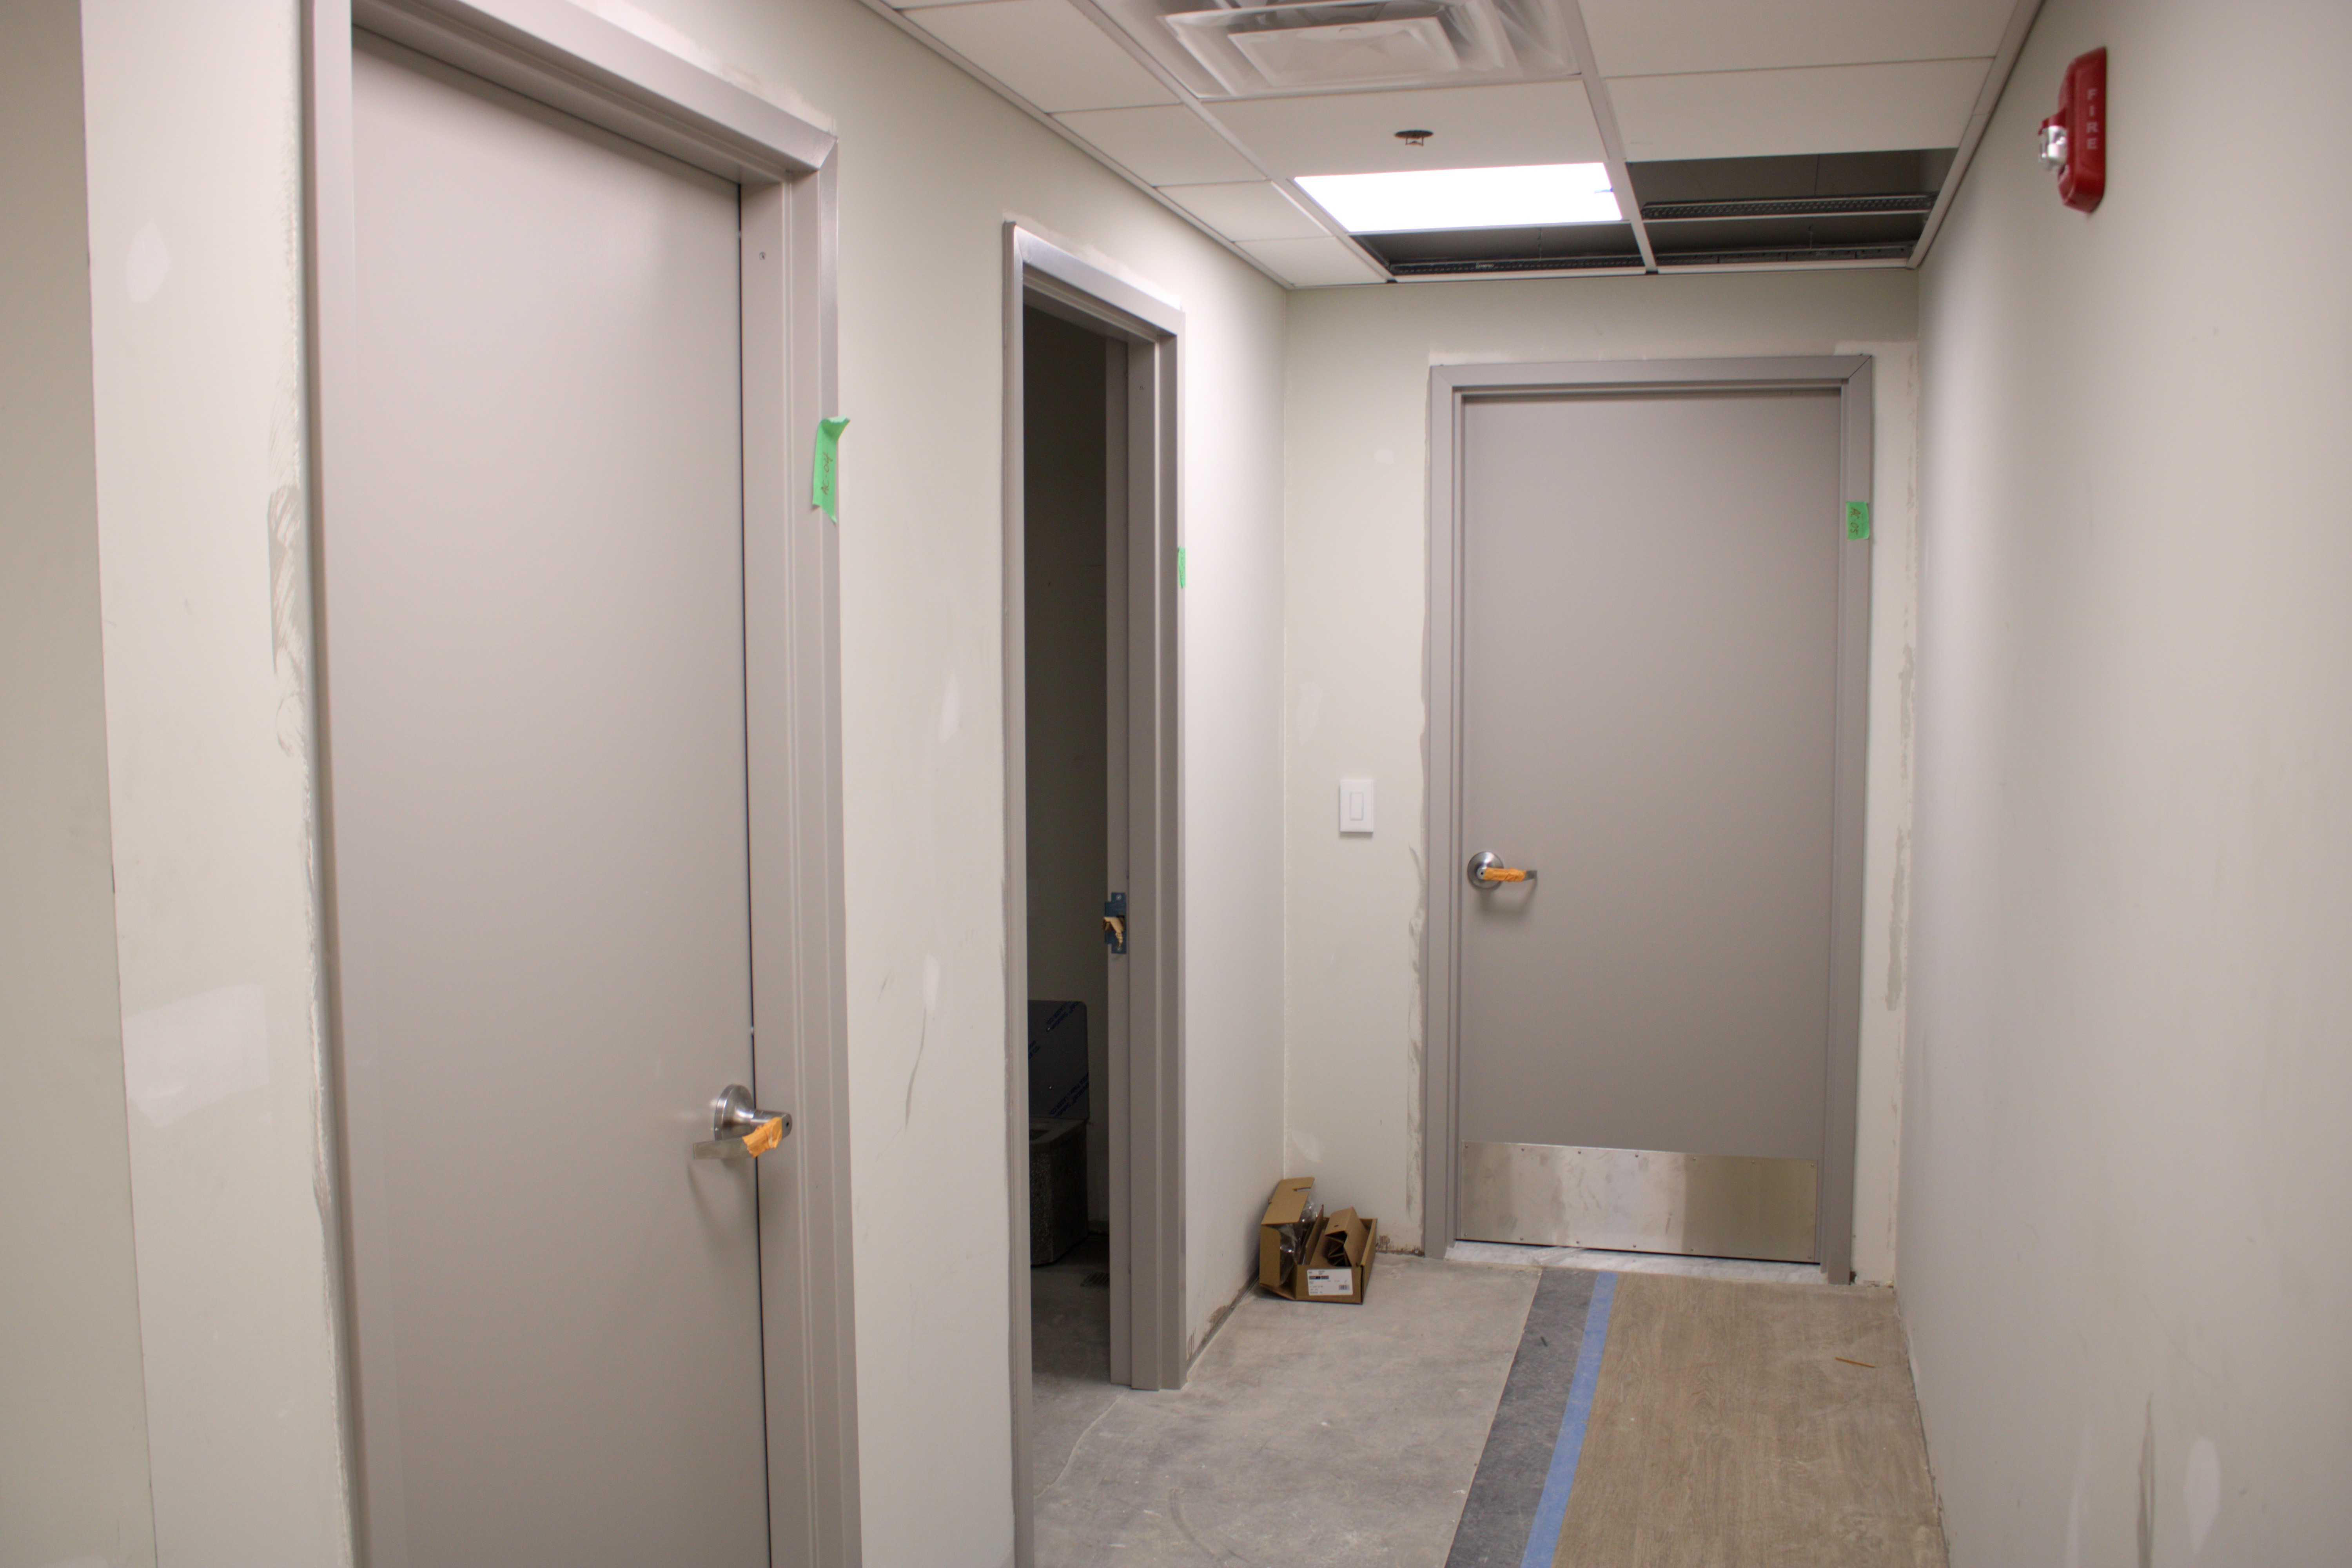 Doors-to-Ambulance-Corps-Restrooms-and-Janitor-Closet